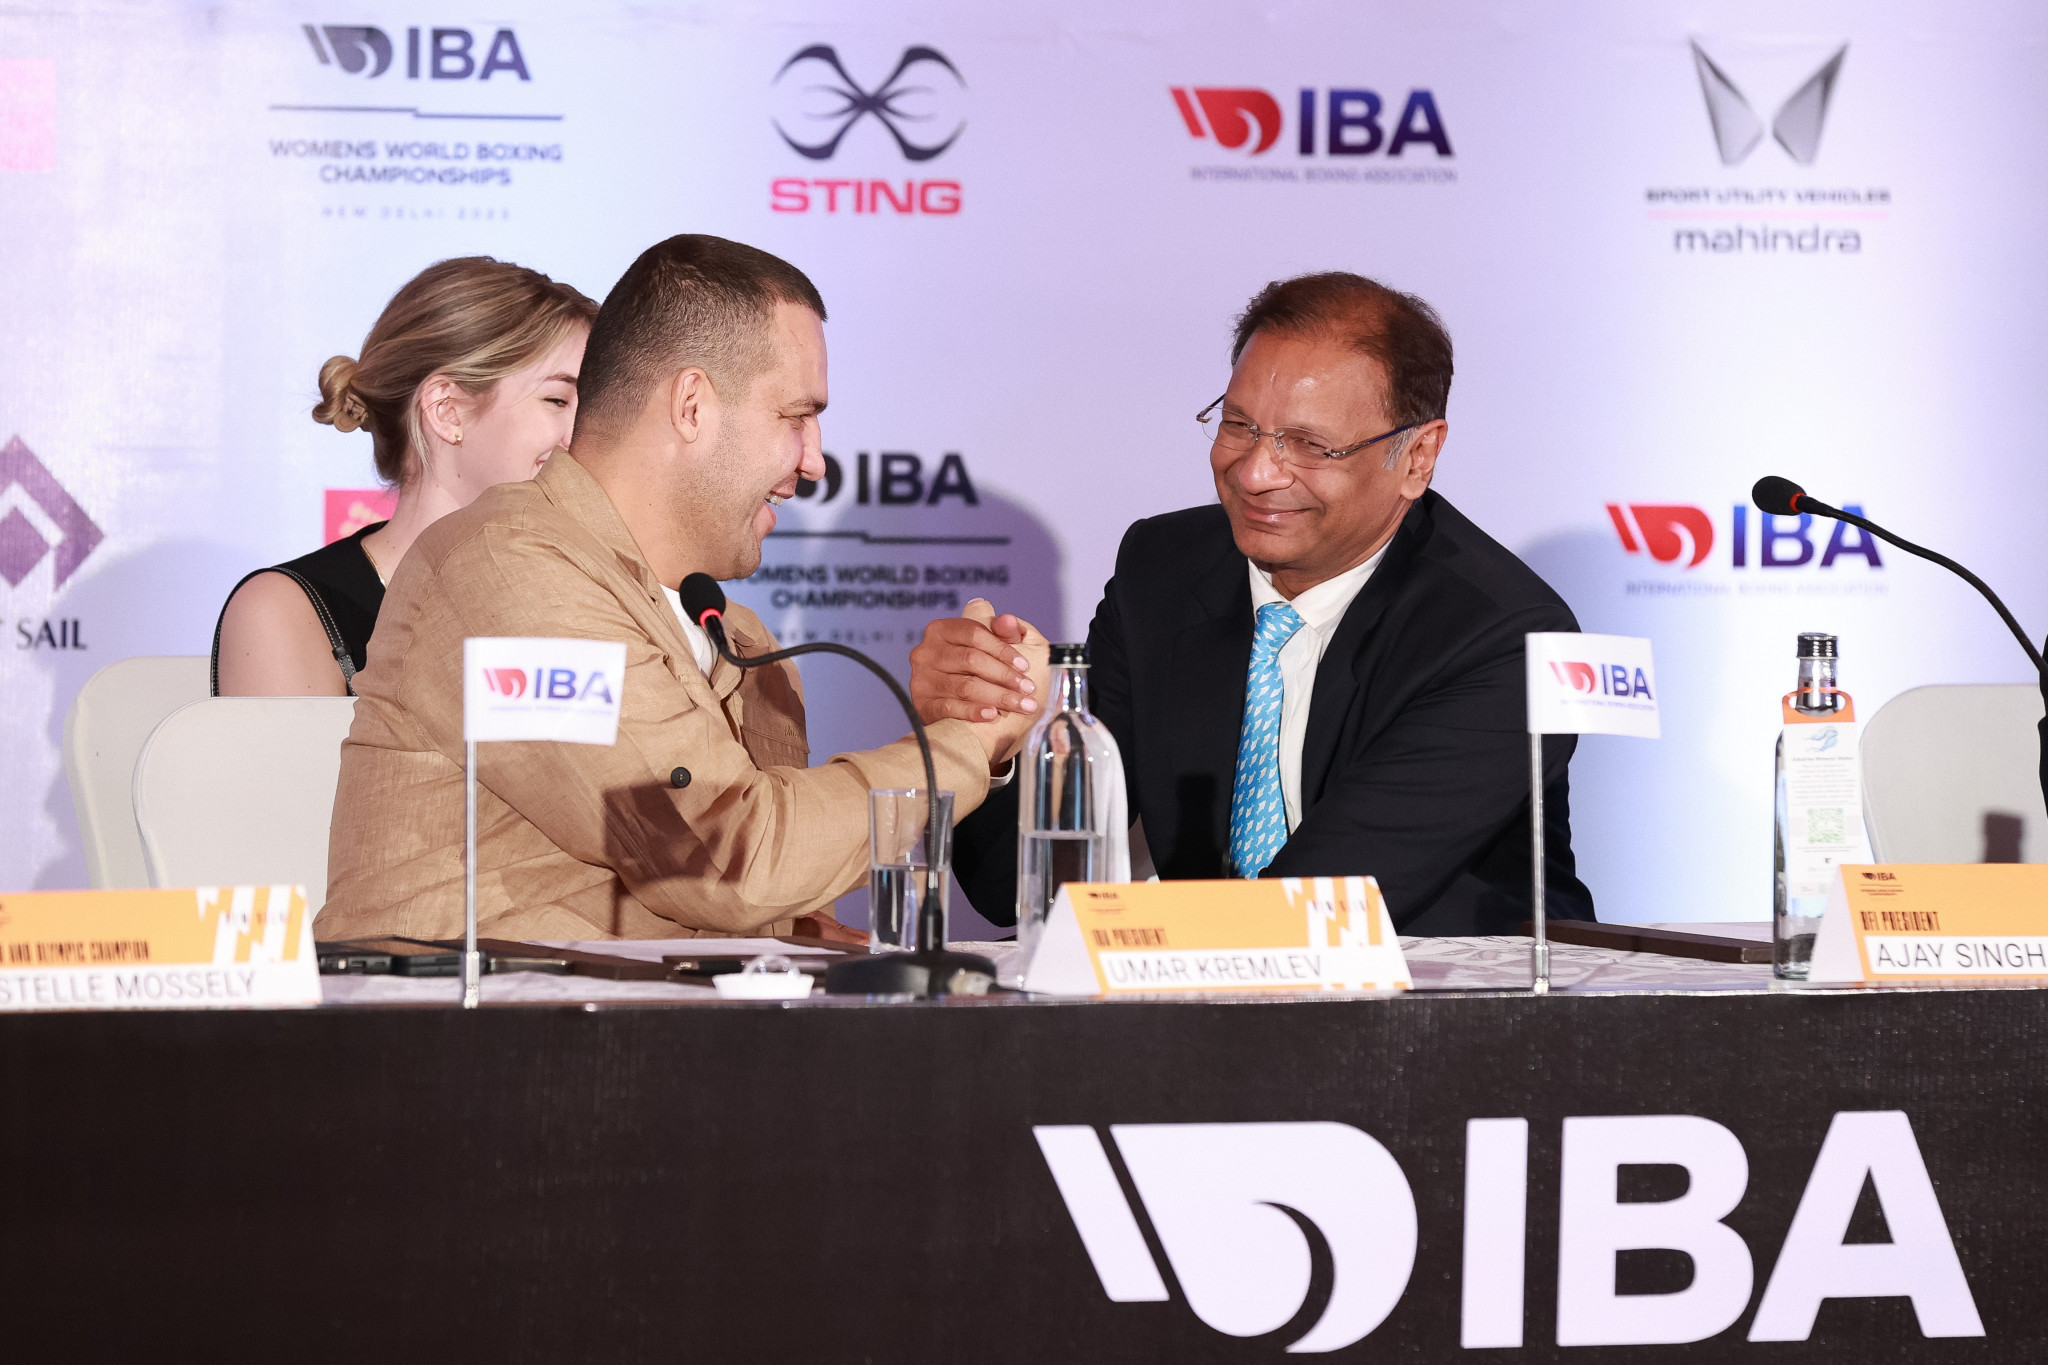 IBA President Umar Kremlev and his Boxing Federation of India counterpart Ajay Singh shake hands before the start of the Women's World Championships in New Delhi ©IBA